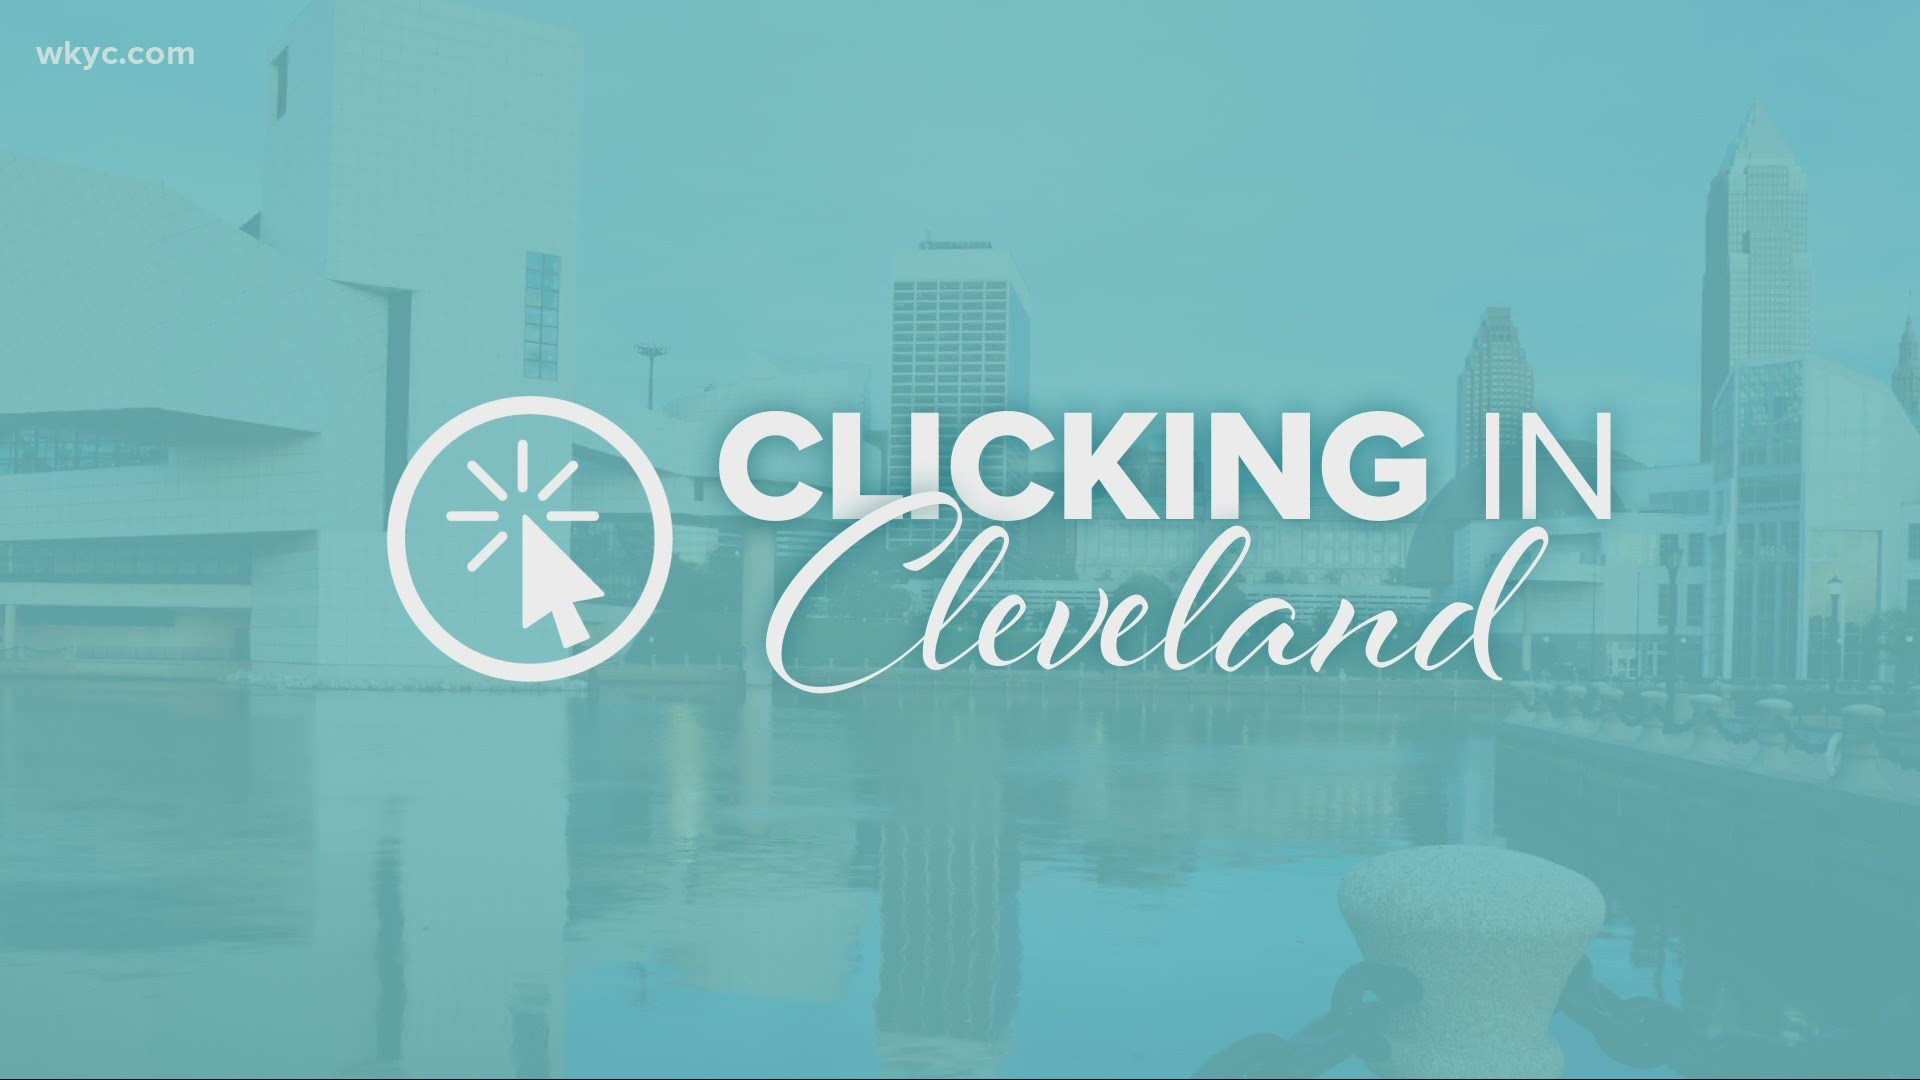 Digital 3News anchor Stephanie Haney has what's trending in our city.  Kevin Love continues to help the community.